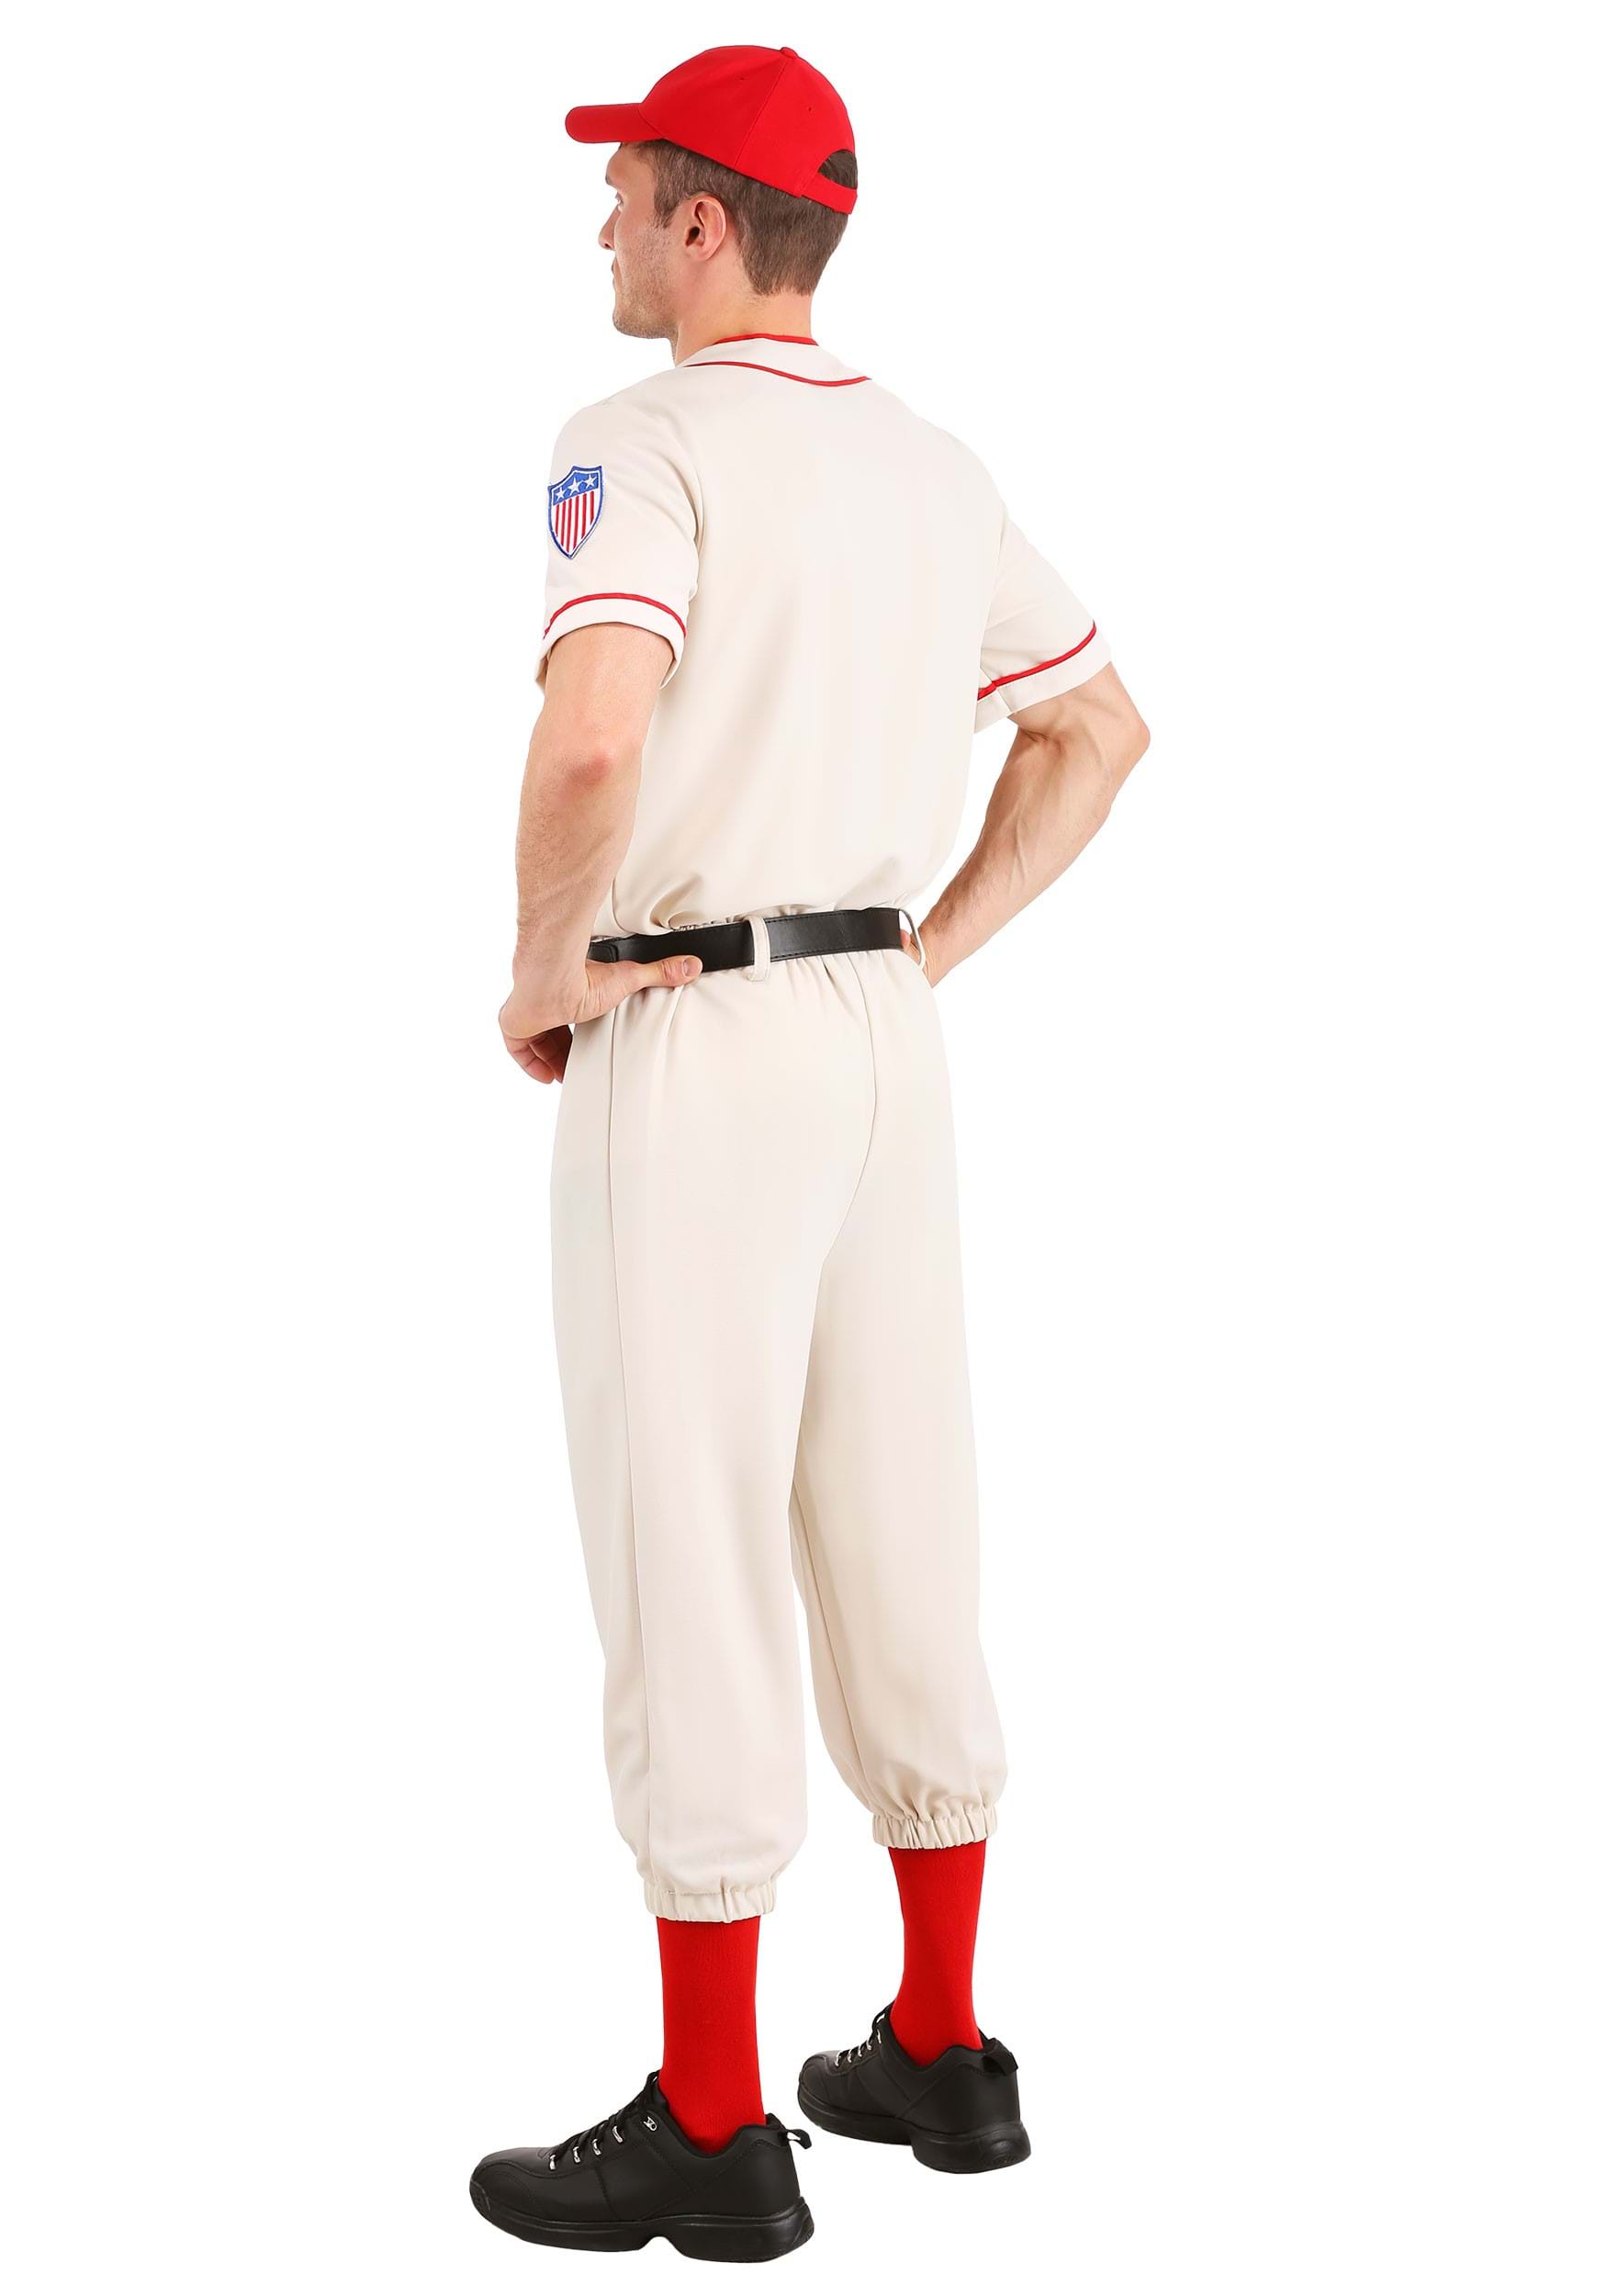 Plus Size Coach Jimmy Fancy Dress Costume From A League Of Their Own , Exclusive